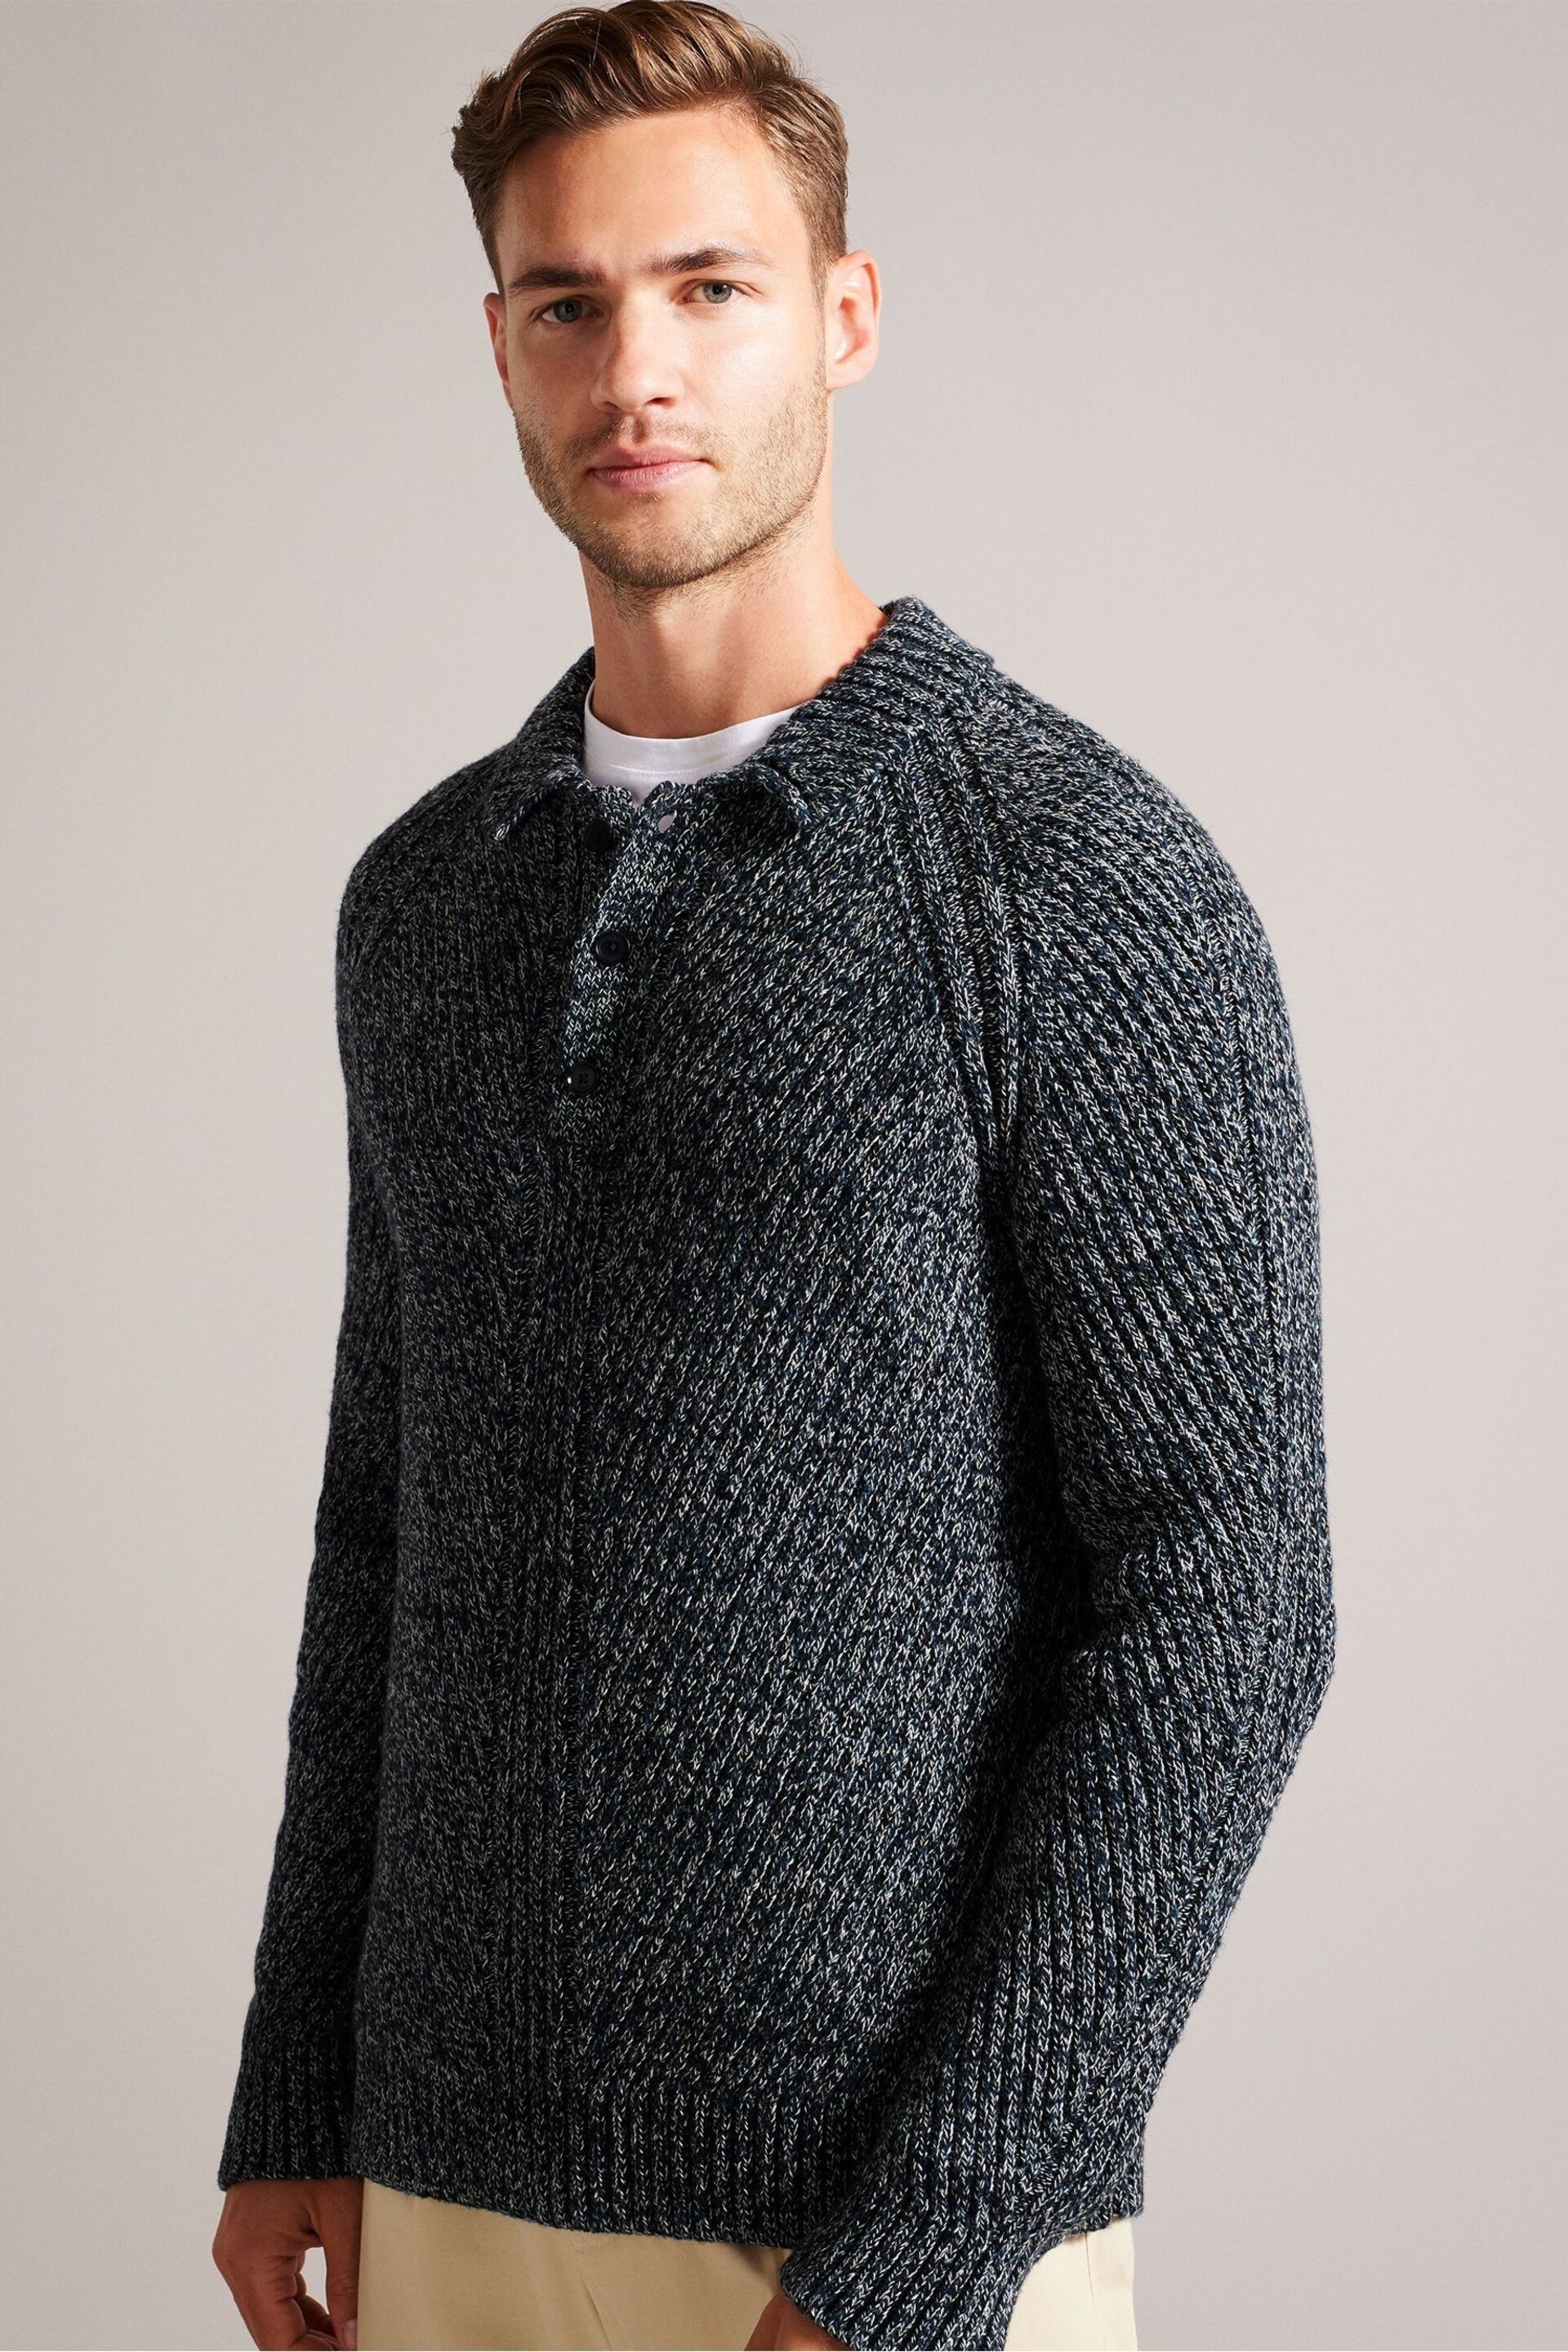 Ted Baker Blue Twisted Engineered Ribbed Jumper - Image 1 of 6